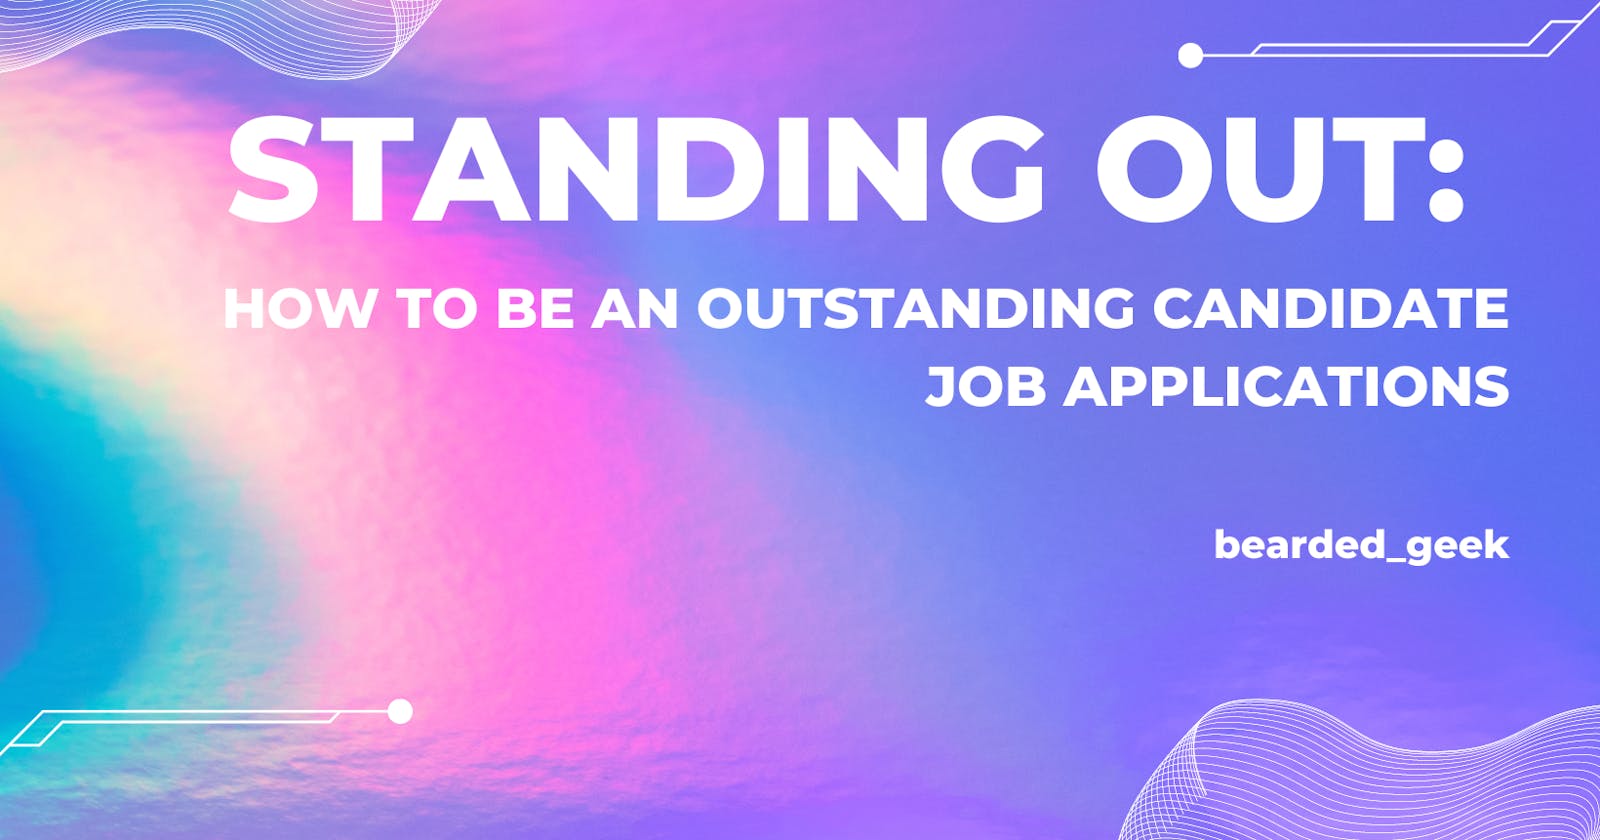 Standing Out: How to be an outstanding candidate - Job Applications